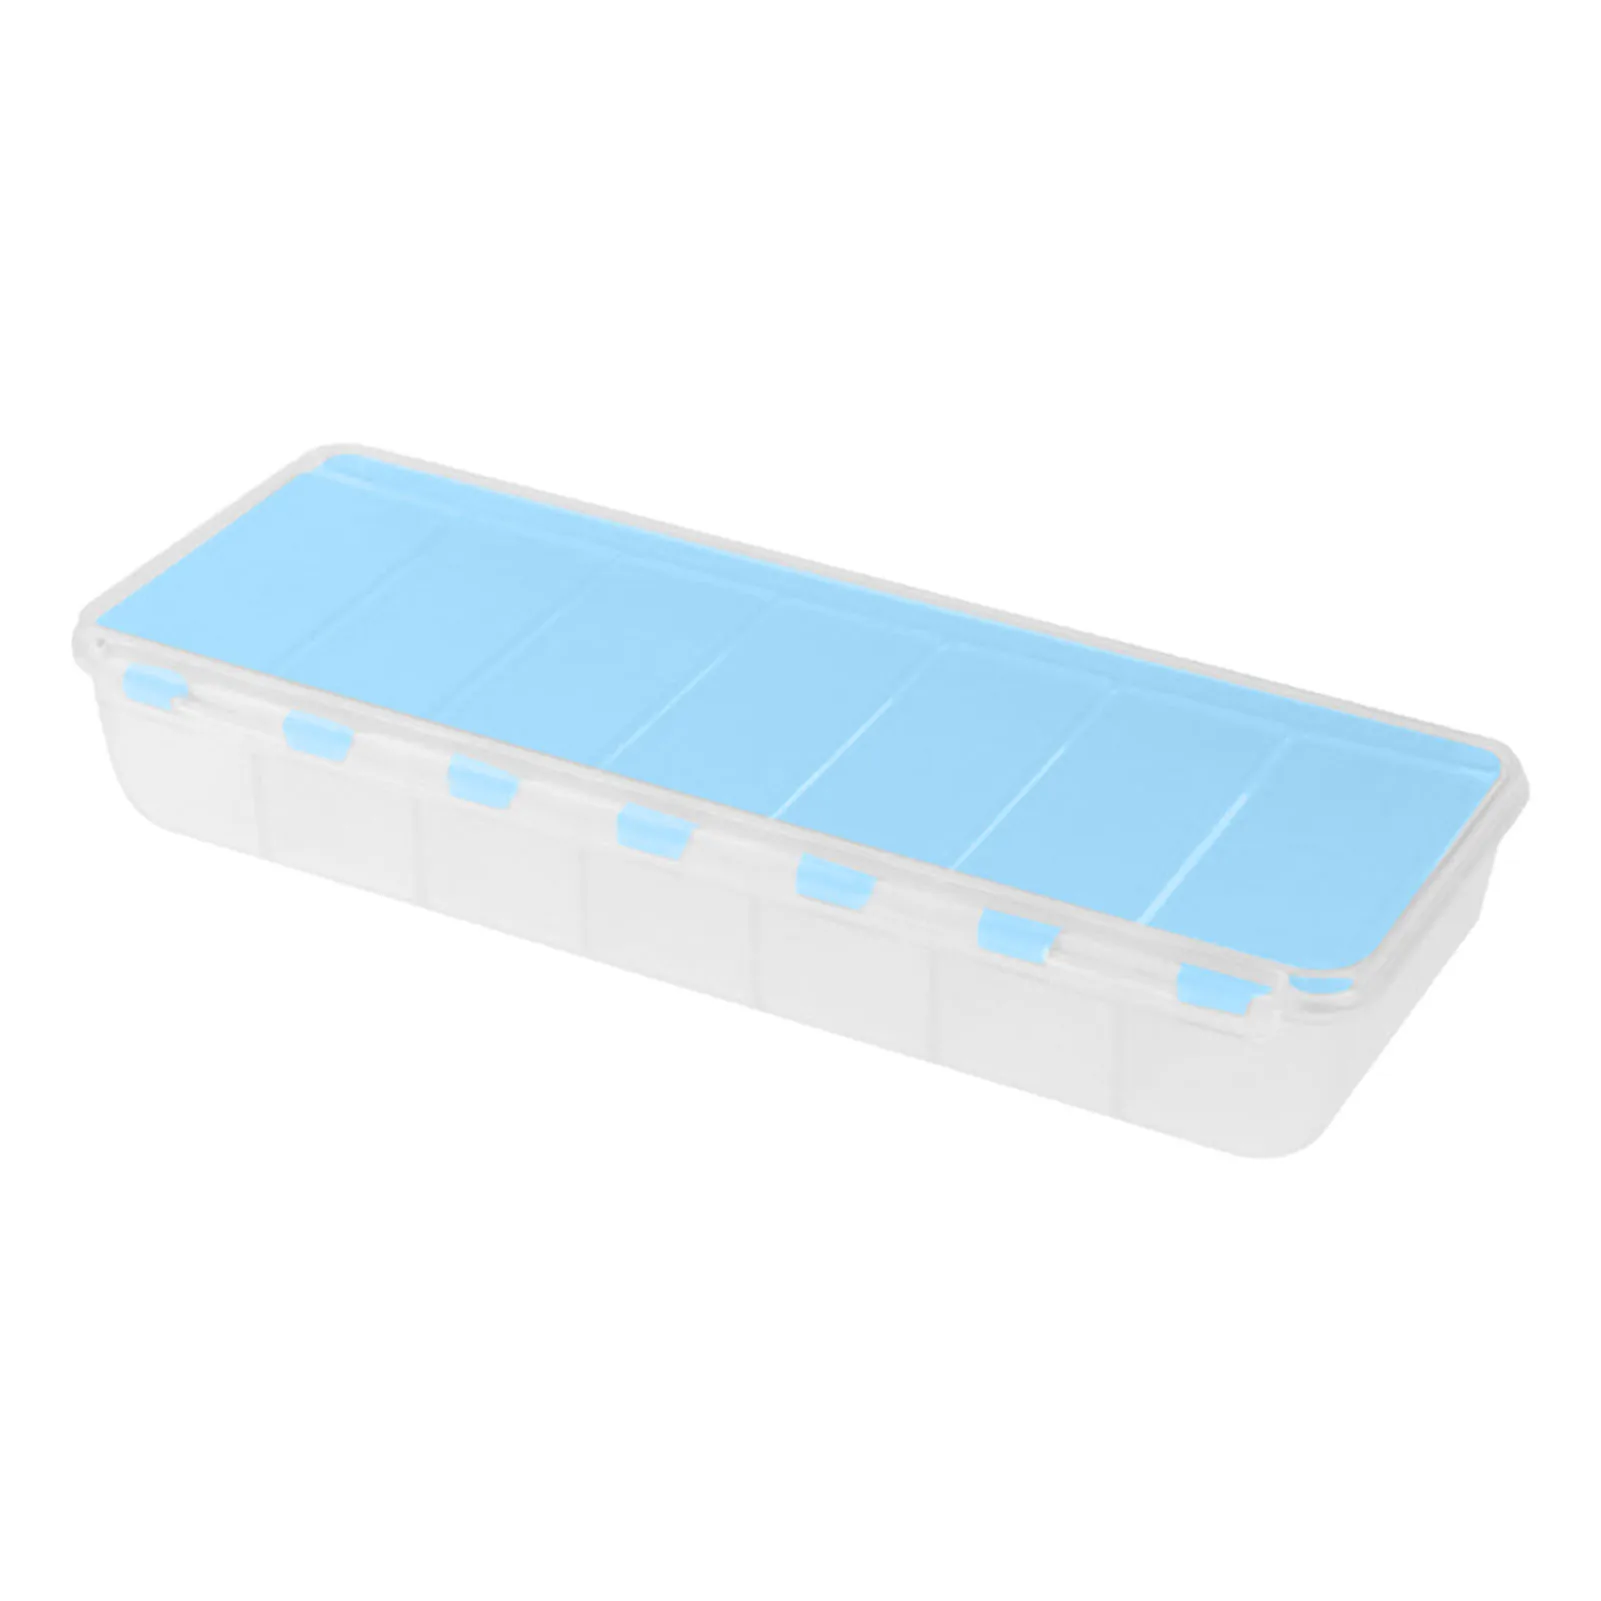 

Weekly Pill Organizer Dose 7-Day Am/Pm Pill Organizer Vitamin And Medicine Box With Large Compartments To Hold Fish Oil And